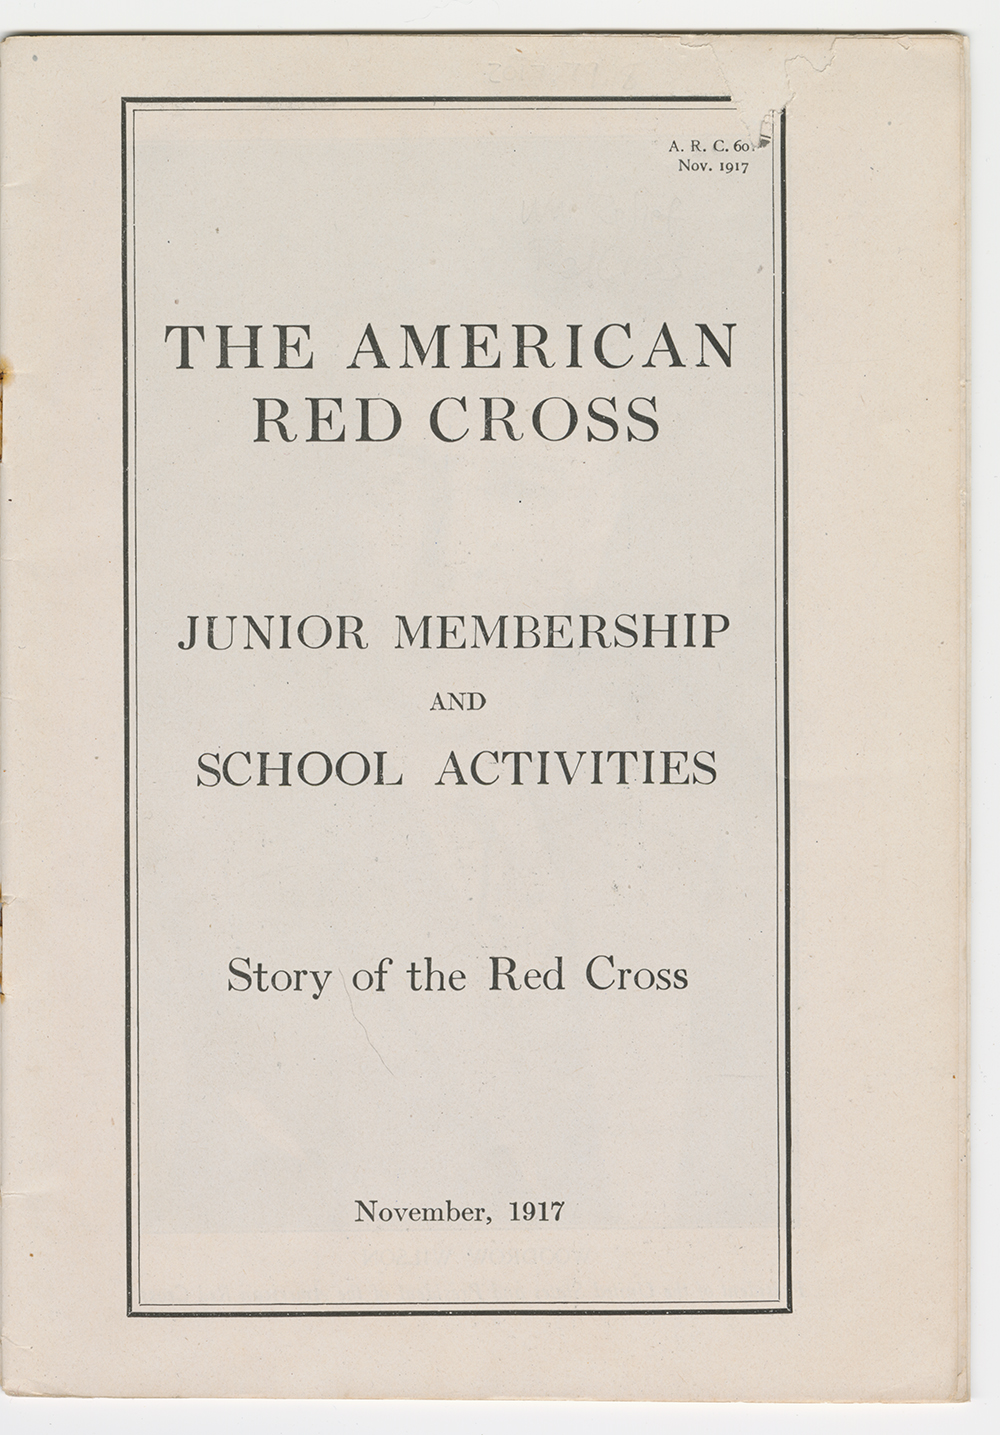 Scan of an inside page. Printed text: 'THE AMERICAN RED CROSS / Junior Membership / School Activities / Story of the Red Cross'